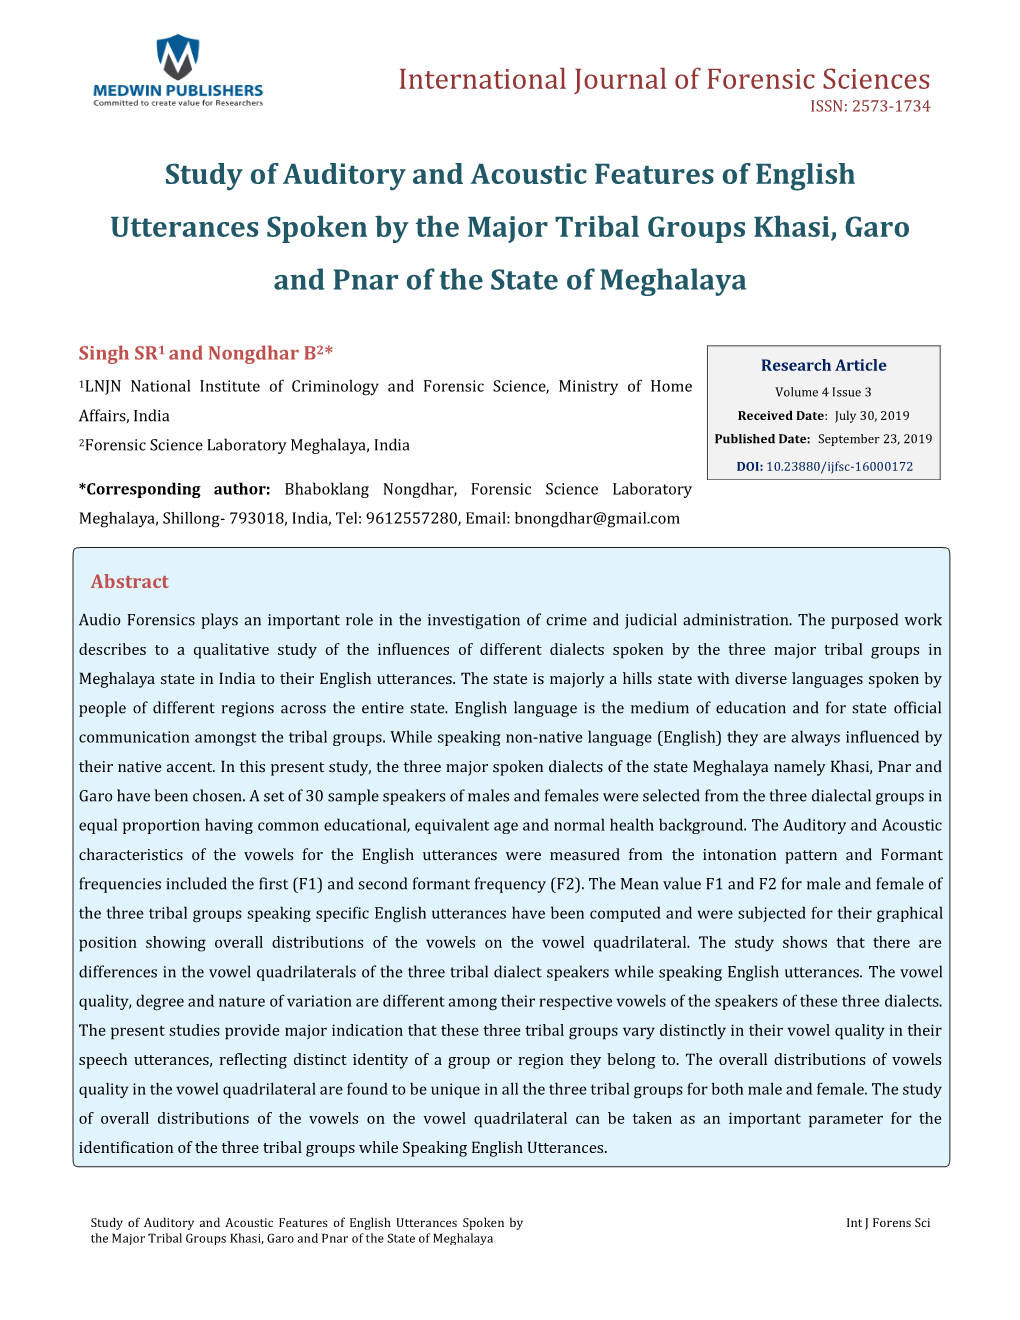 Singh SR and Nongdhar B. Study of Auditory and Acoustic Features of English Utterances Spoken by the Major Tribal Groups Khasi